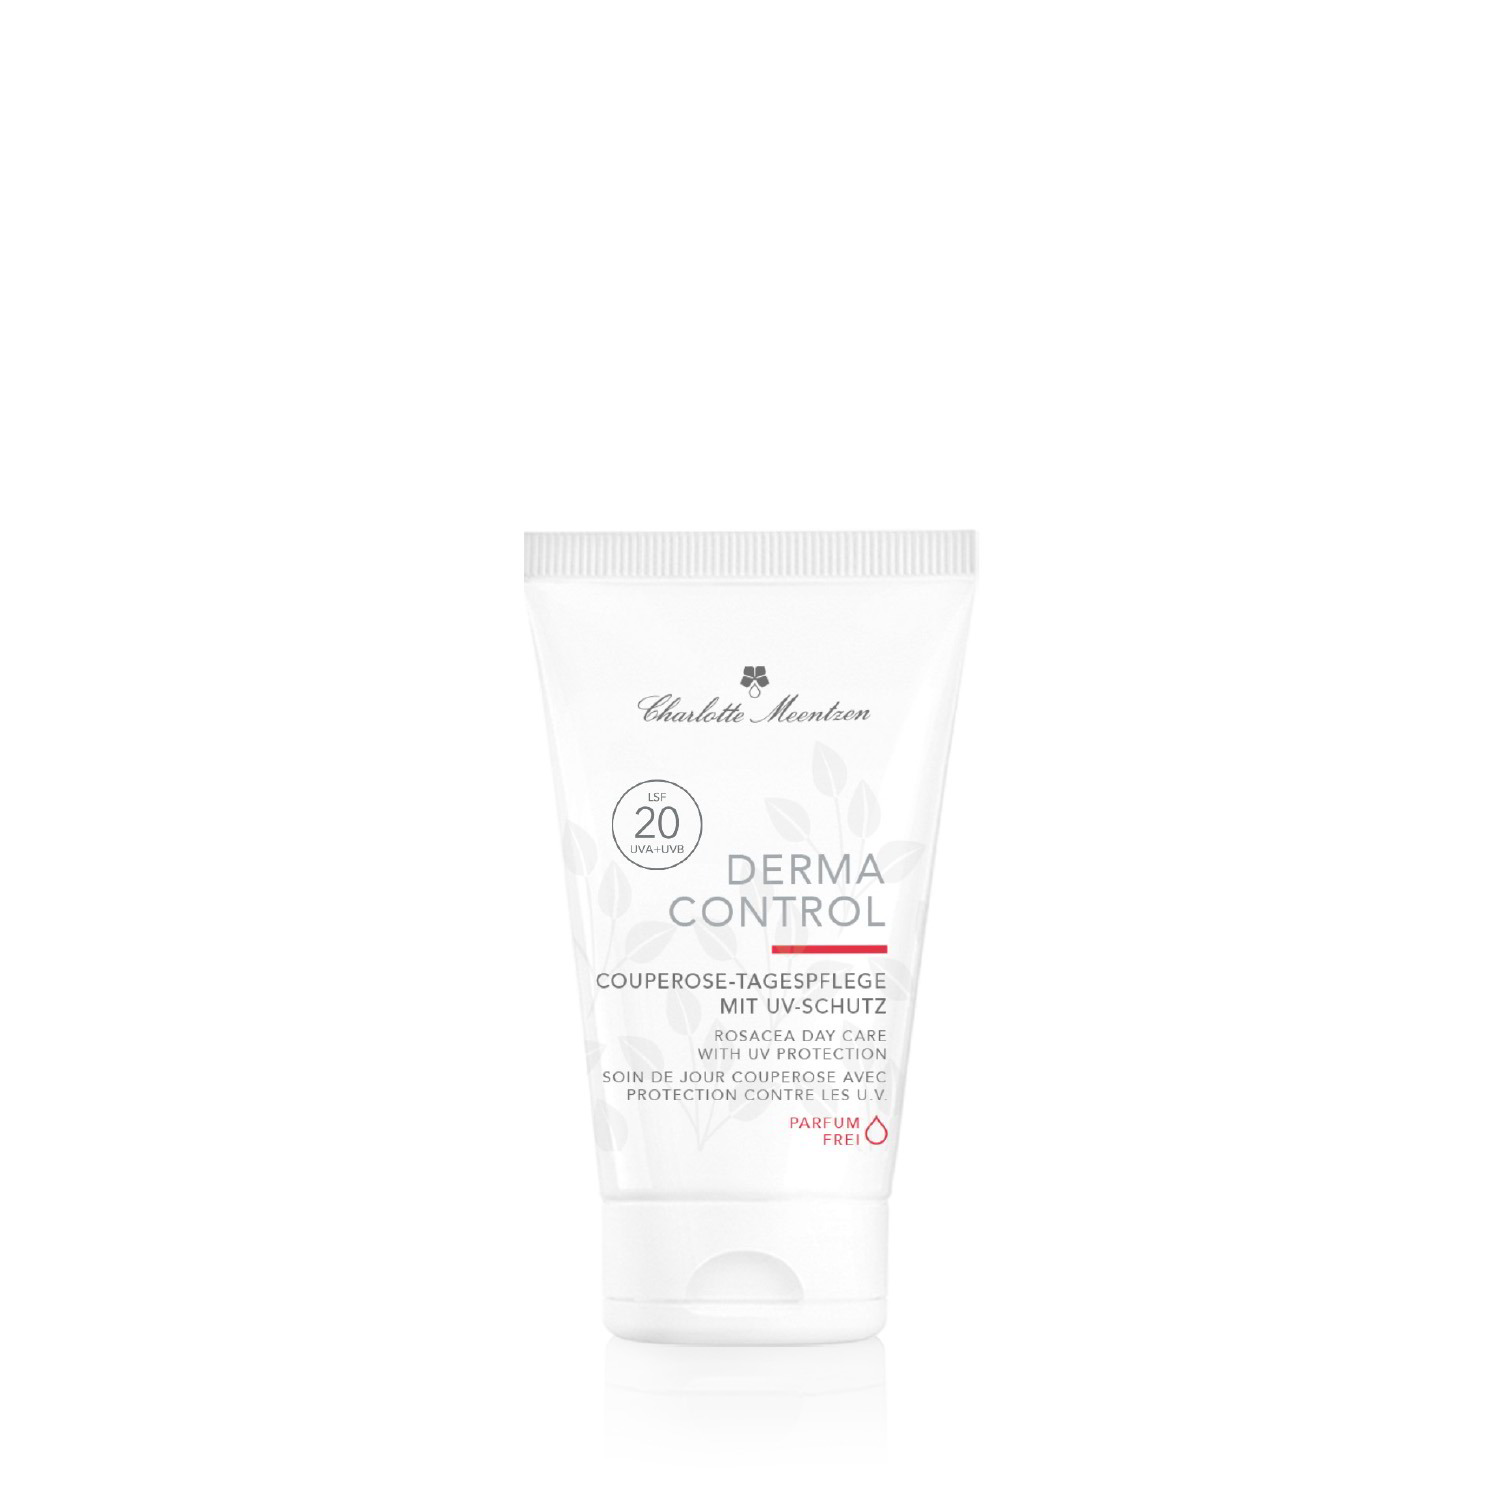 Derma Control Rosacea Day Care with UV Protection